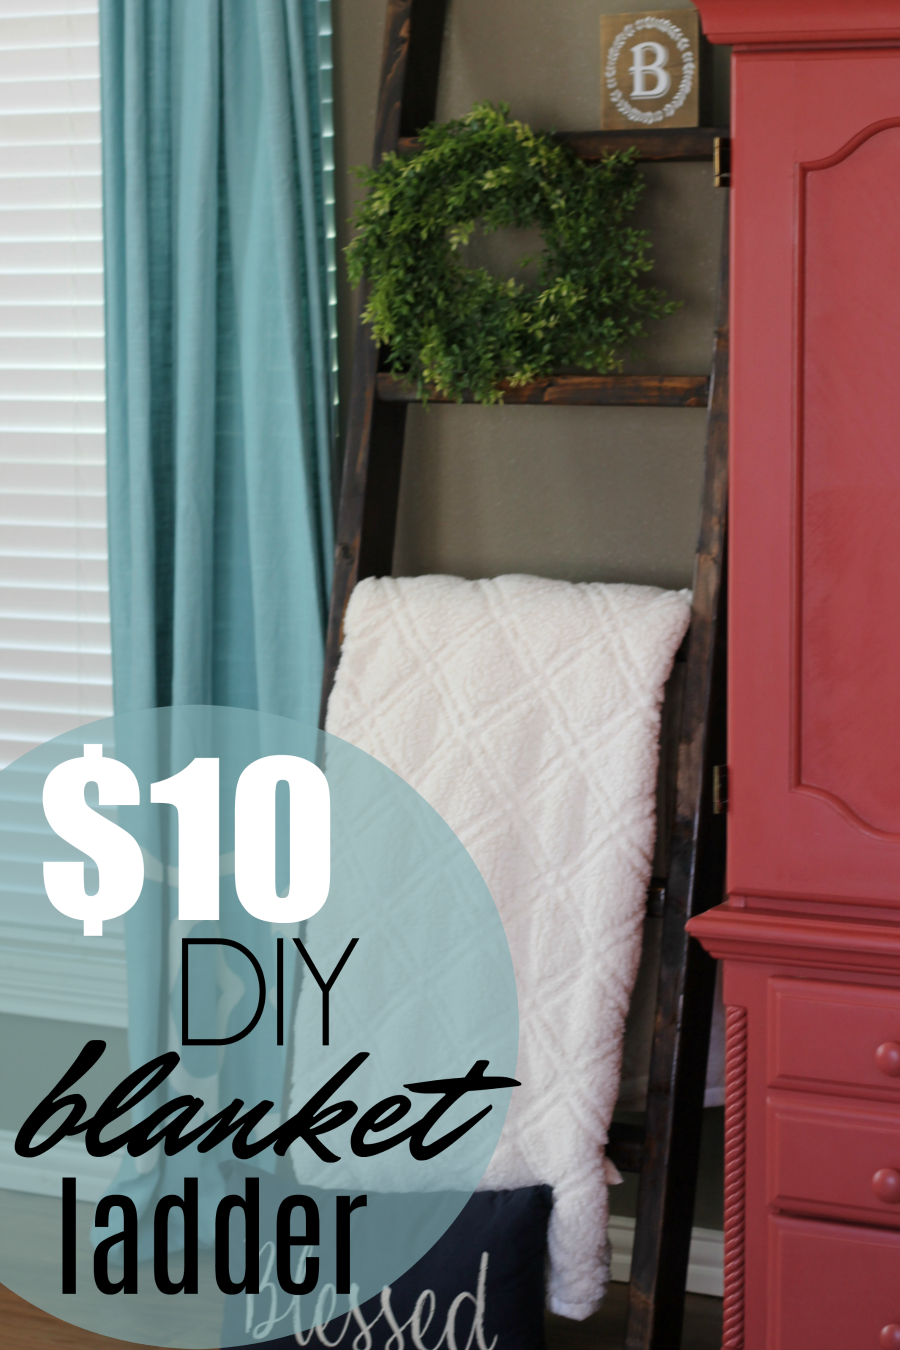 farmhouse style for your home - DIY blanket ladder to organize and decorate